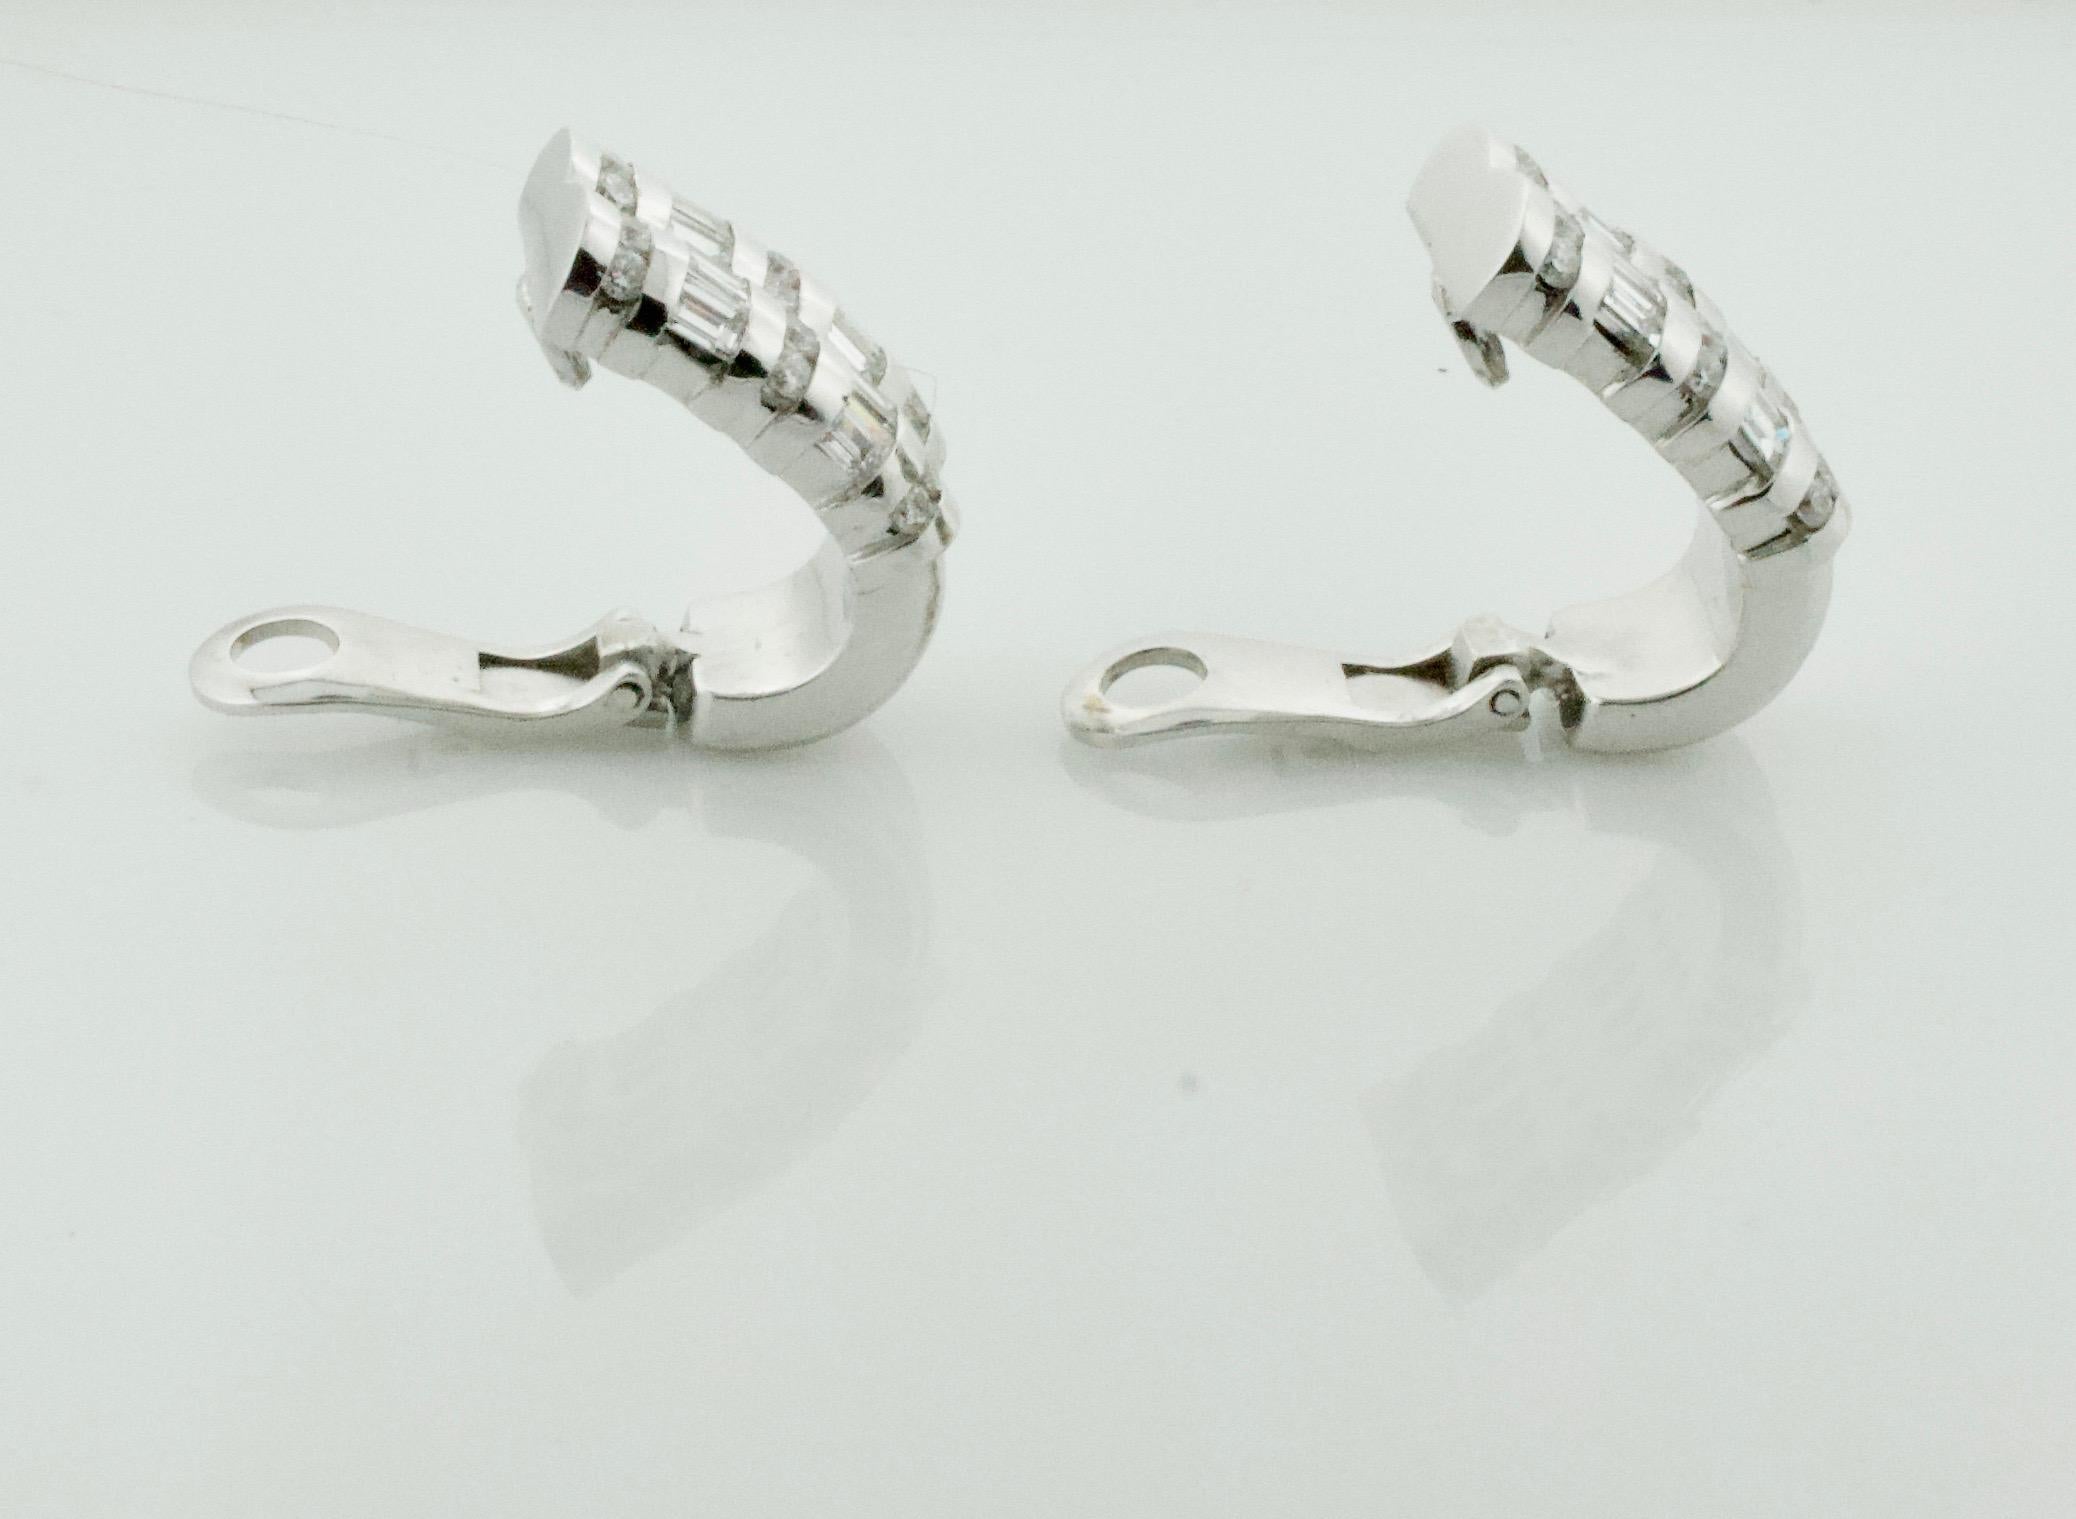 Baguette Cut Chanel Set Diamond  Earrings in 18k White Gold 3.45 Carats Total Weight For Sale